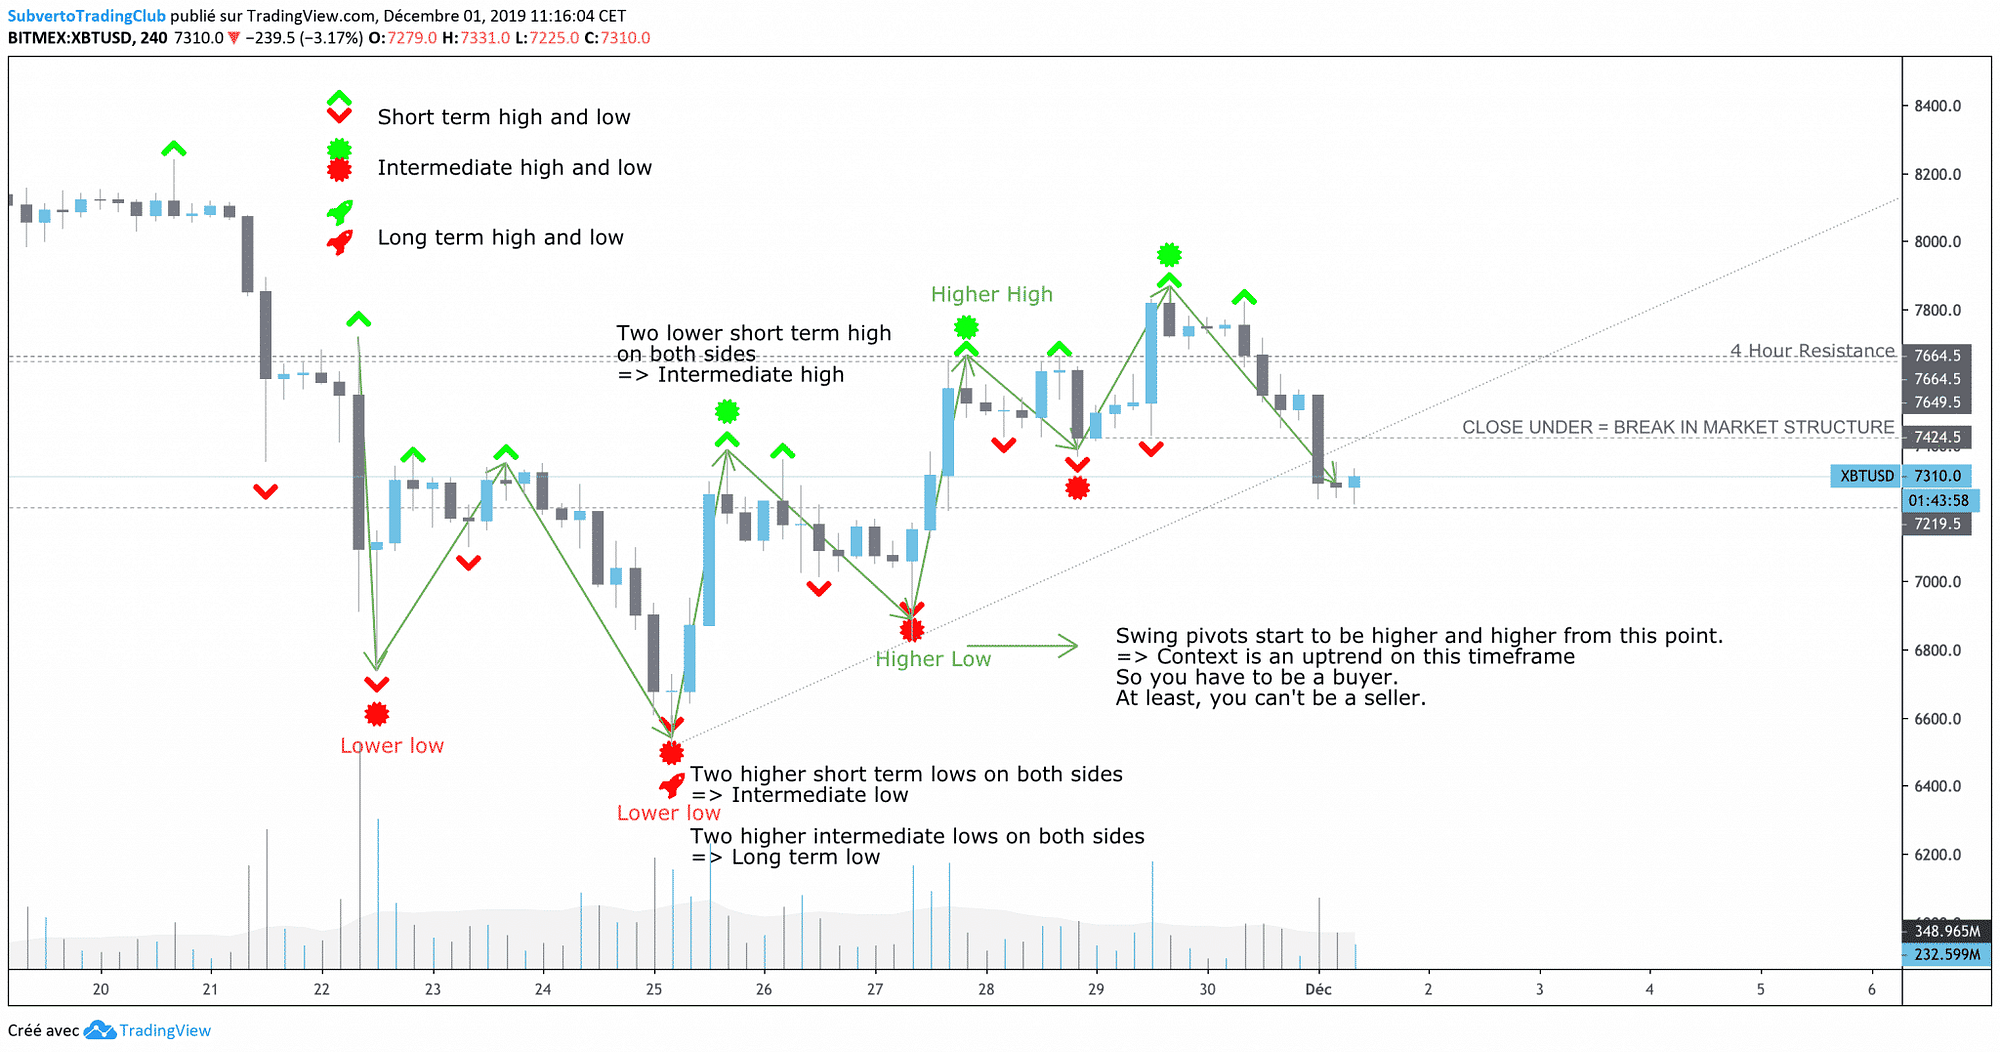 market structure of bitcoin on H4